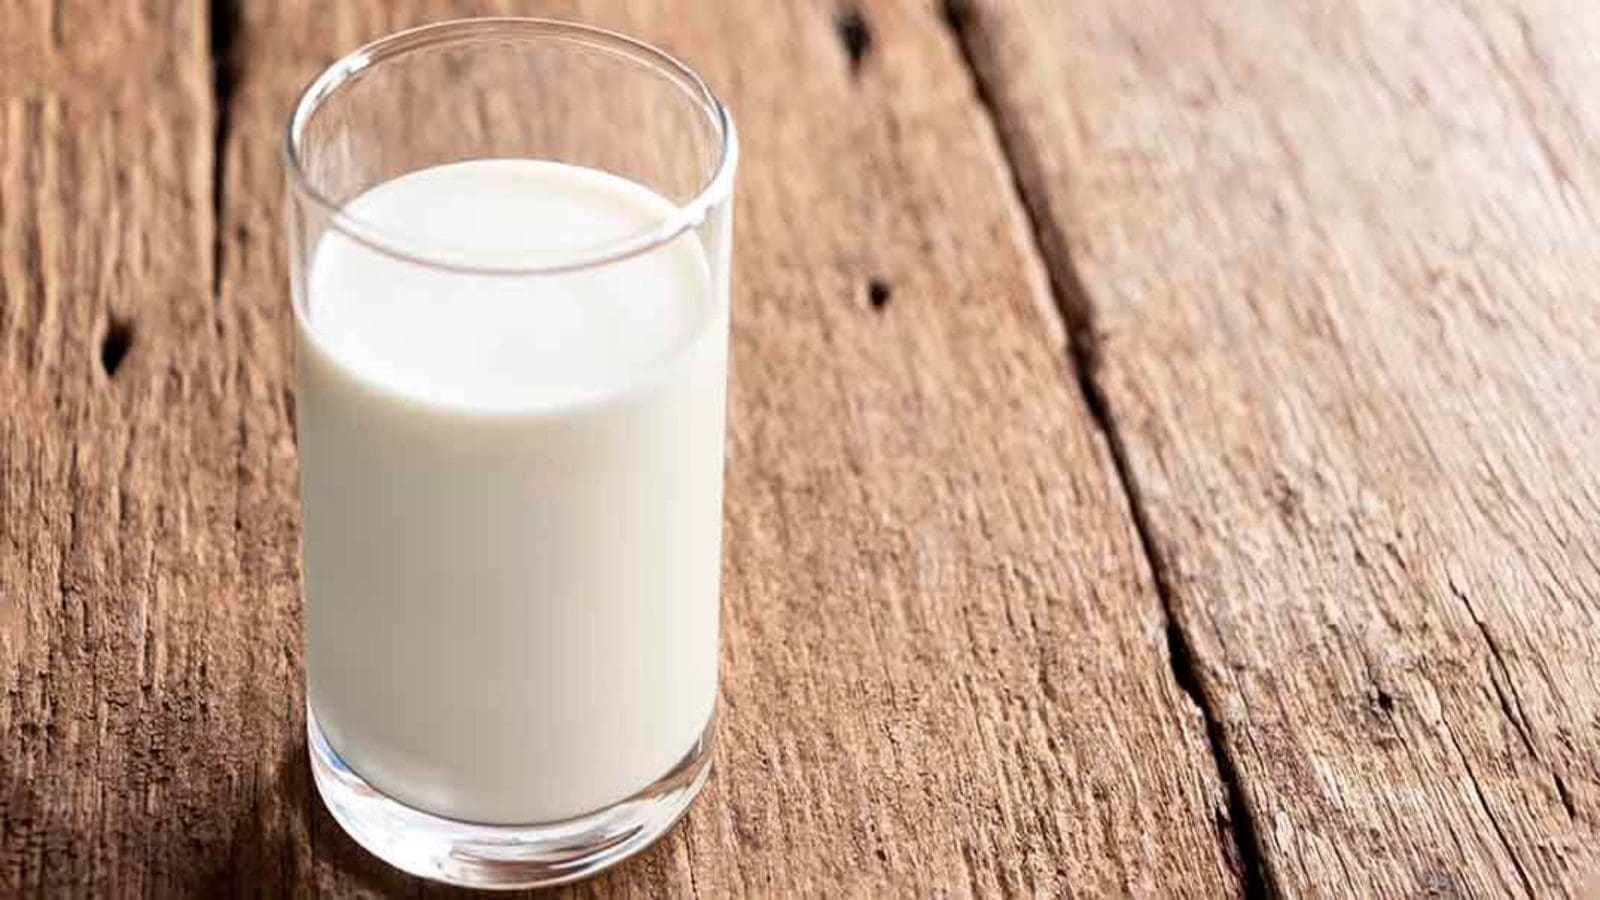 Nestlé taps into emerging tech to accelerate development of animal-free dairy proteins